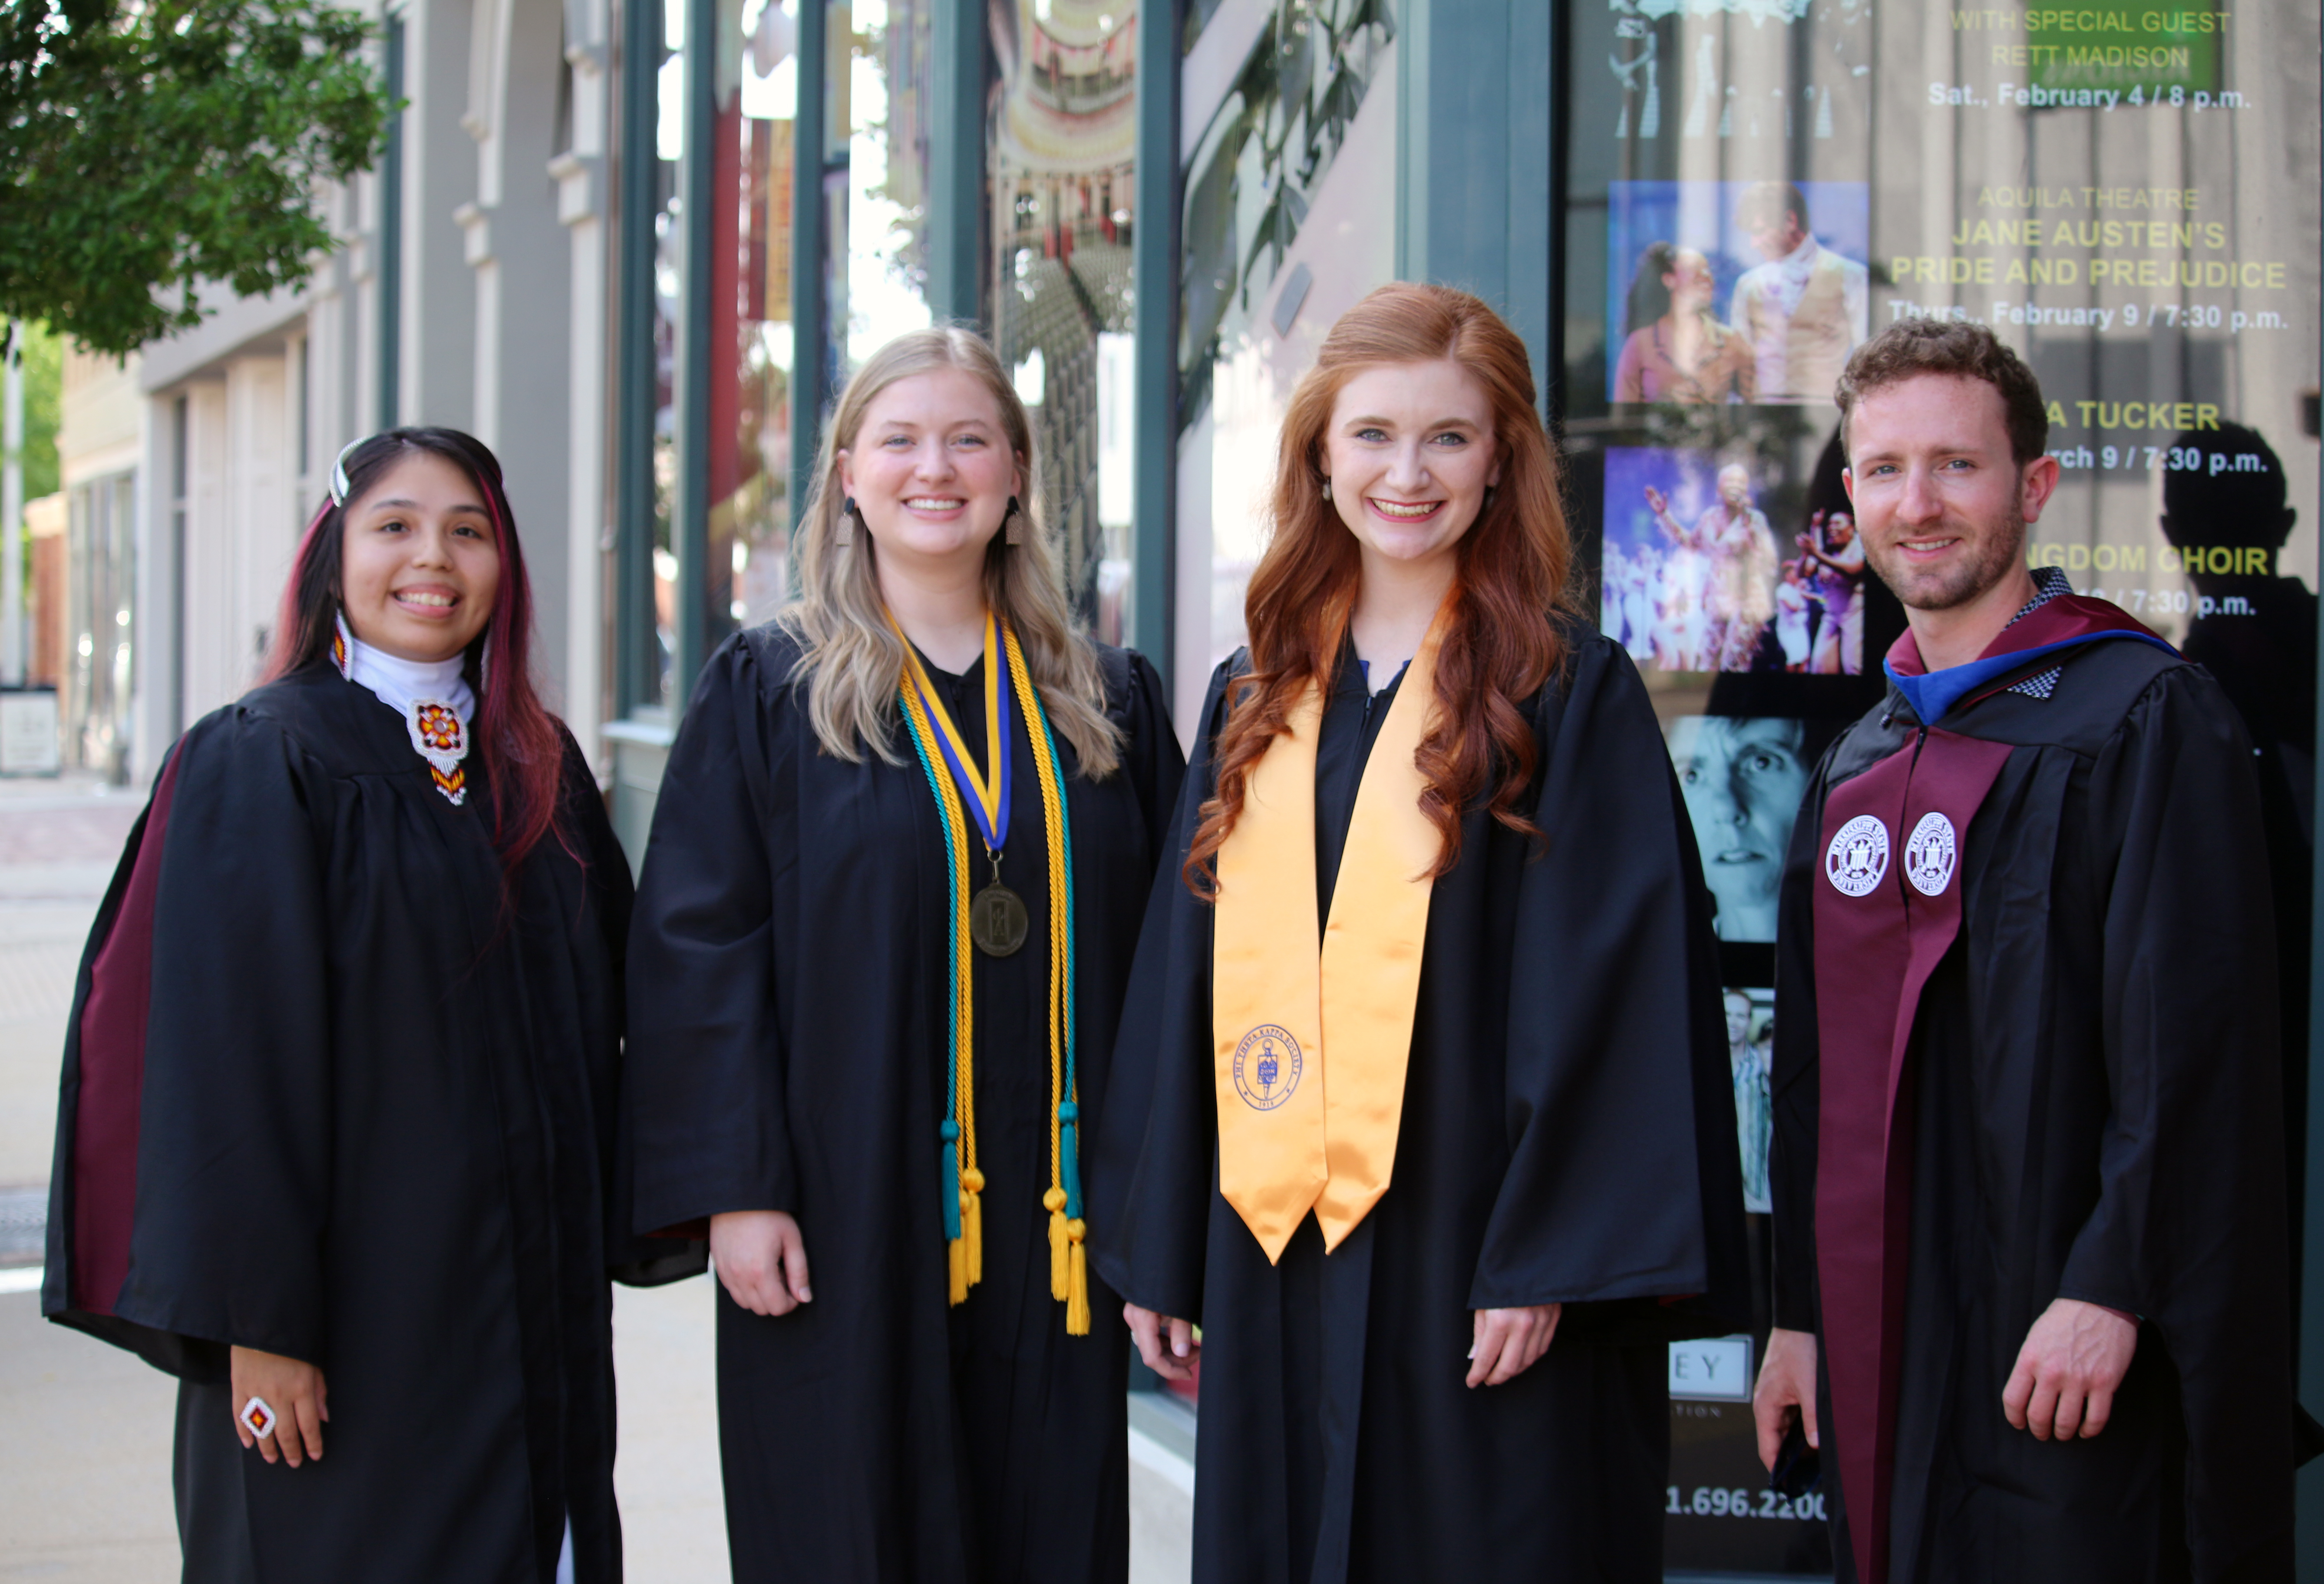 Four students 3 females and 1 male in commencement regalia